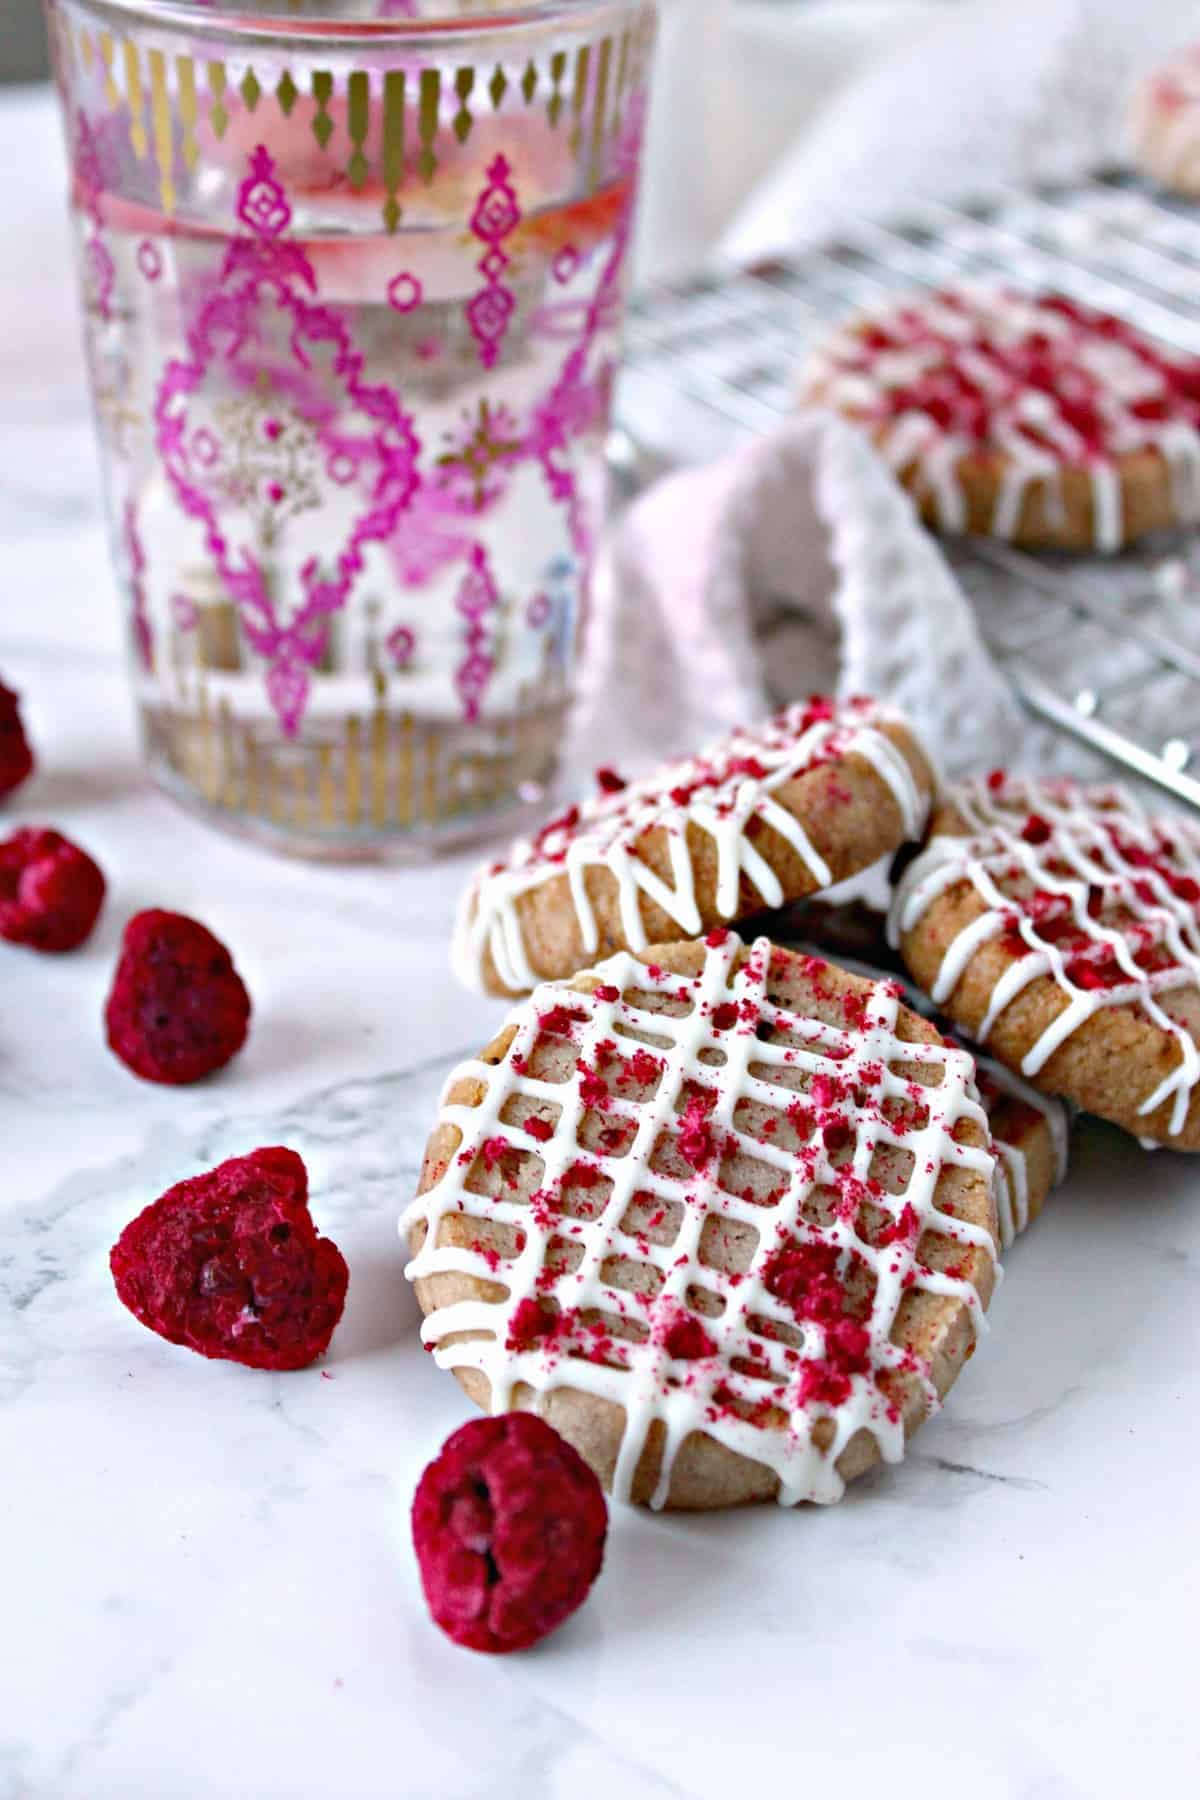 Raspberry Shortbread with White Chocolate Drizzle! Buttery, melt-in-your-mouth cookies with a hint of raspberry flavor, these tender cookies make a wonderful tea time treat.